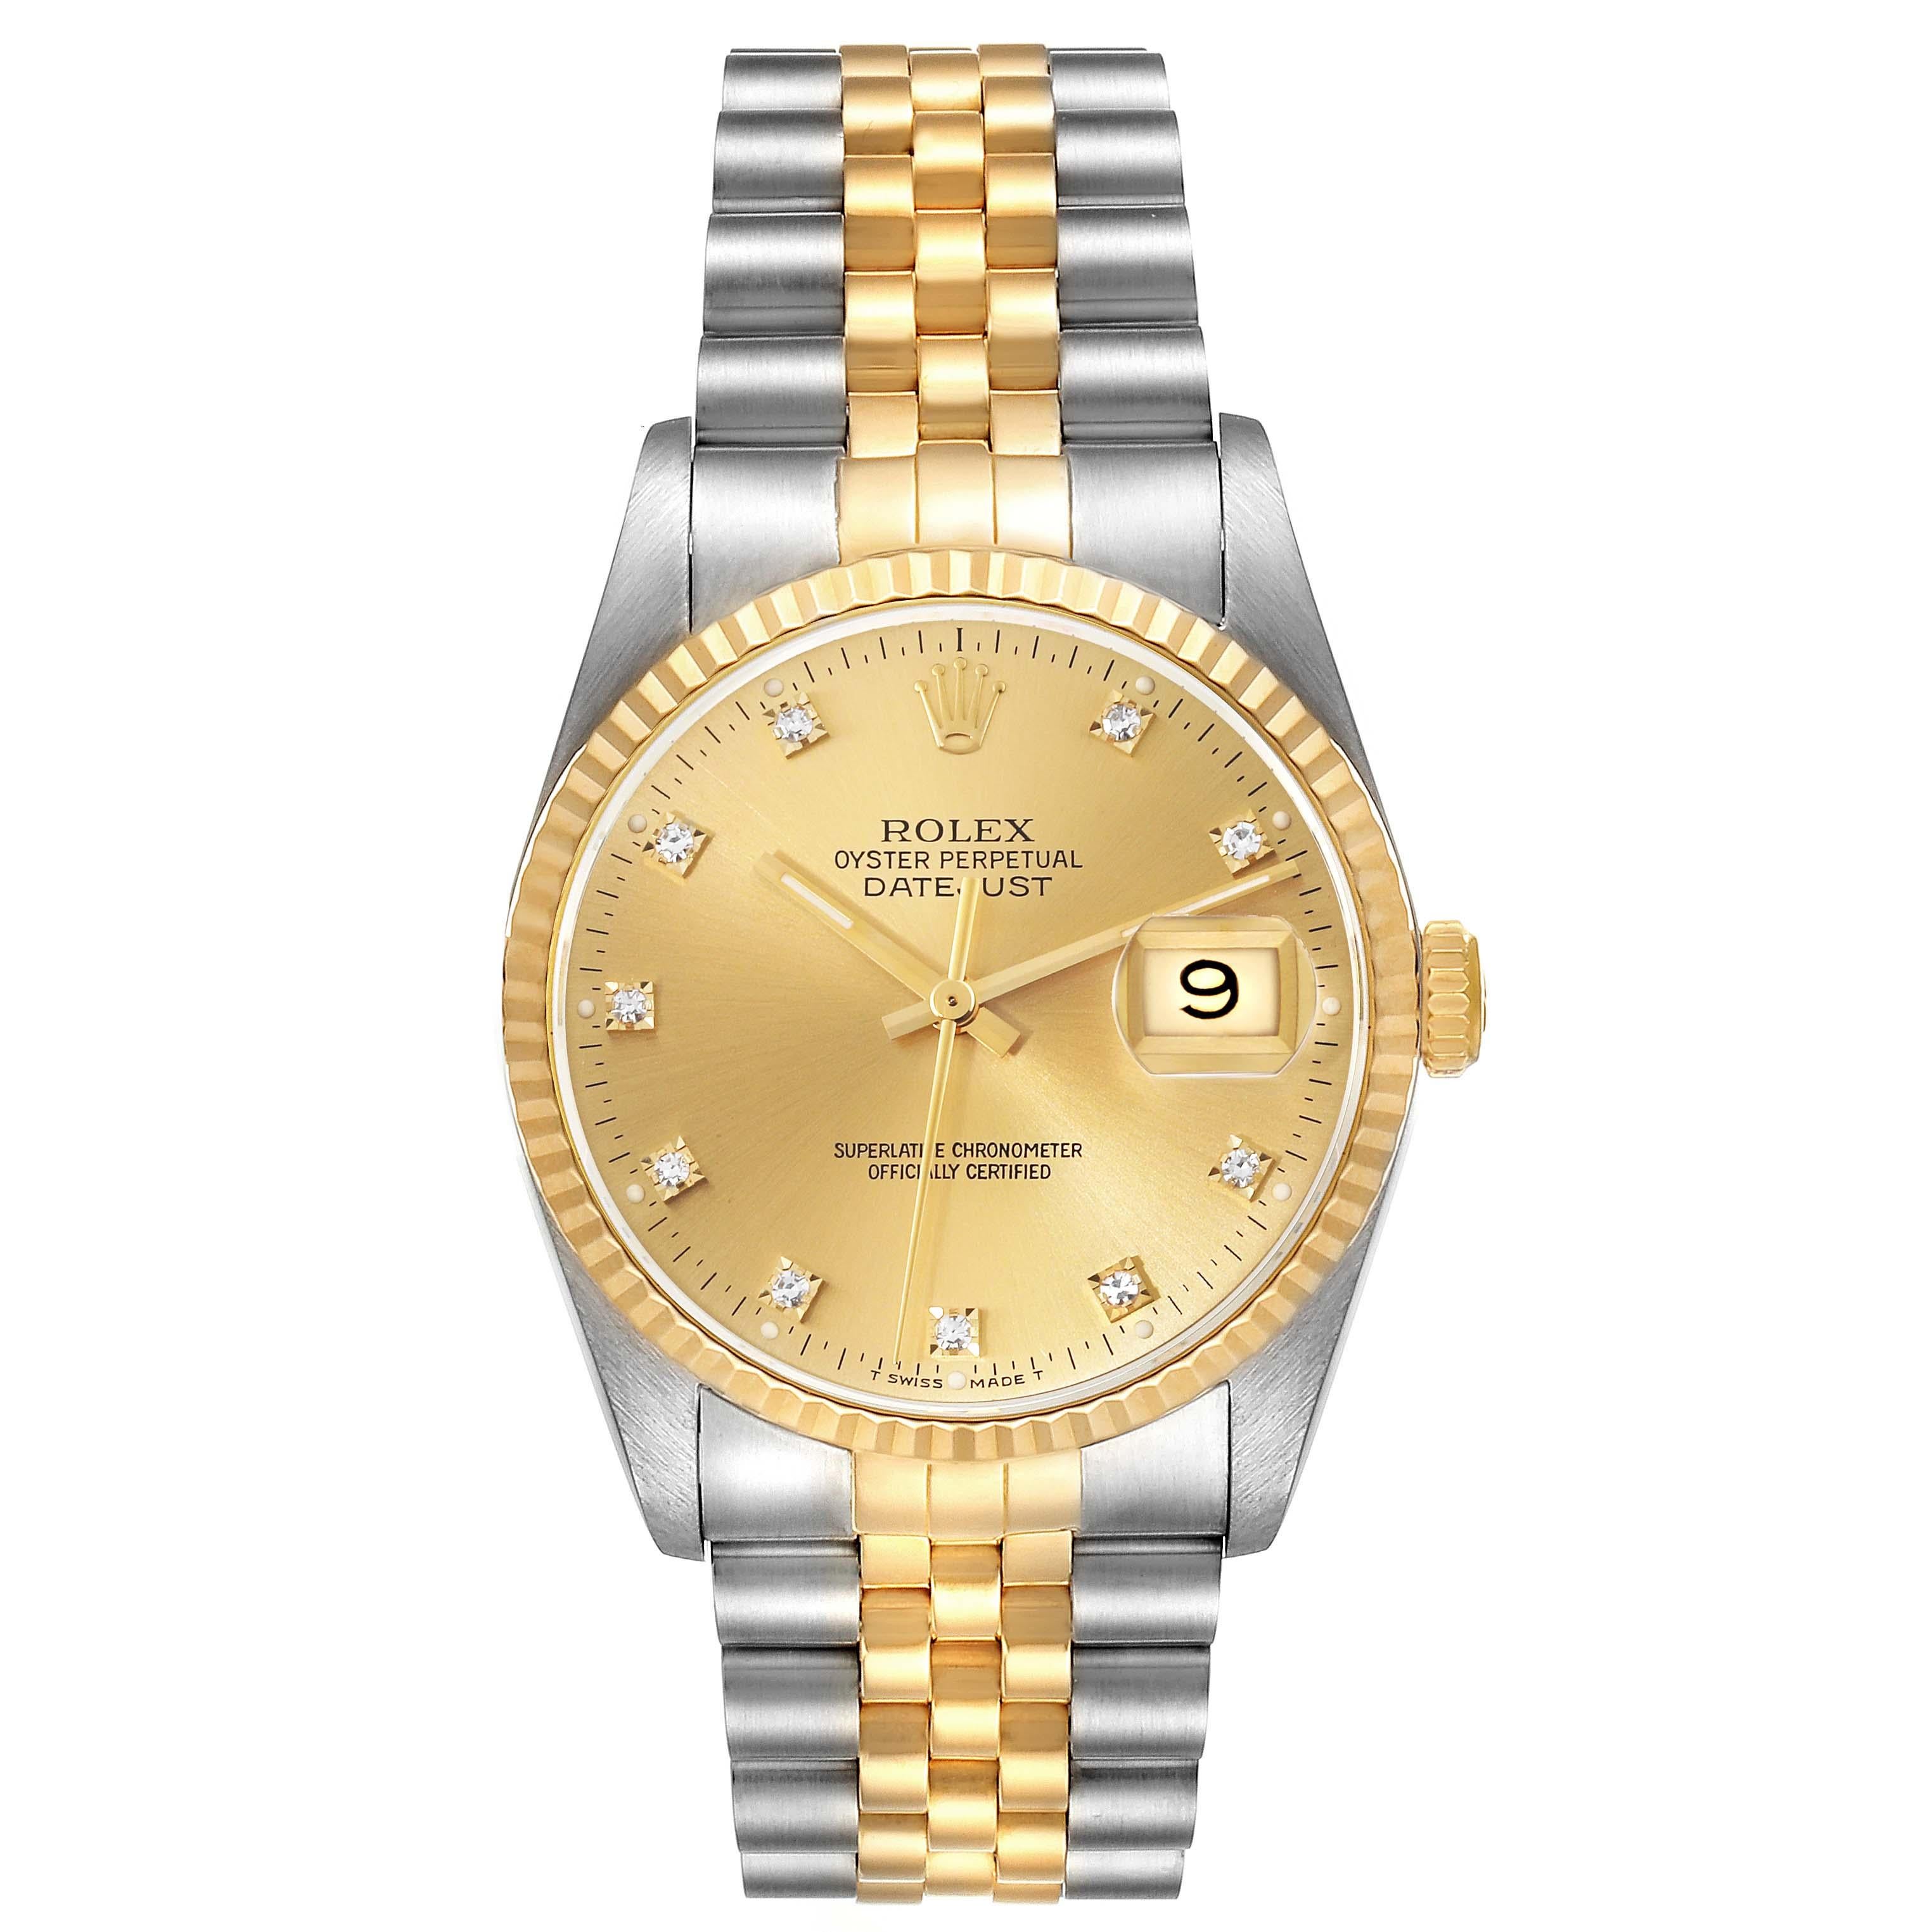 Rolex Datejust Diamond Dial Steel Yellow Gold Mens Watch 16233 For Sale 6